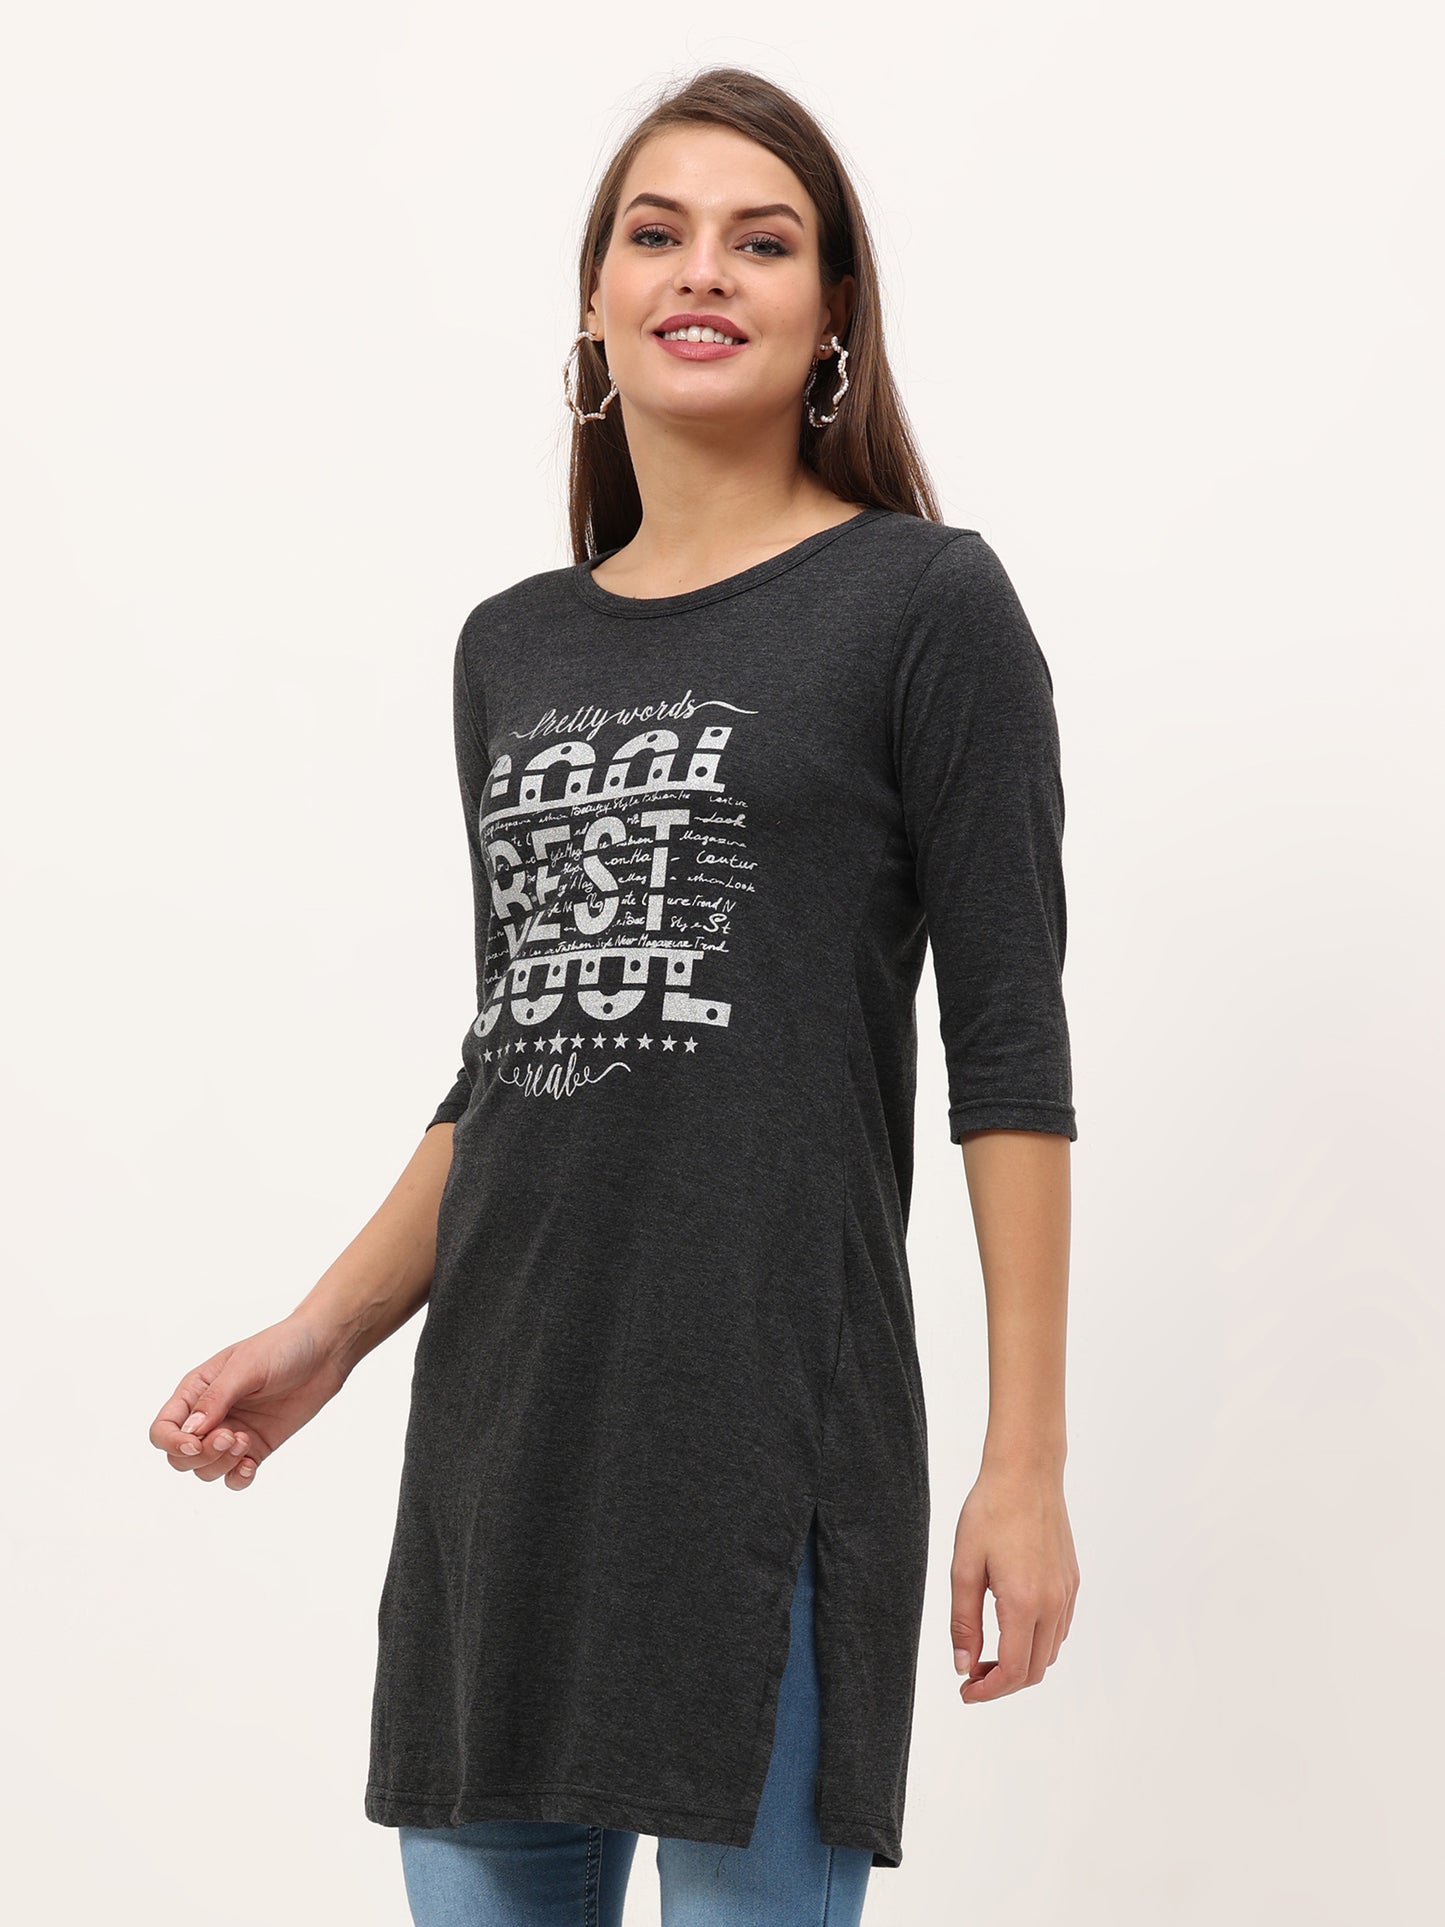 Women's Cotton Printed 3/4 Sleeve Long Top - (Pack of 2)